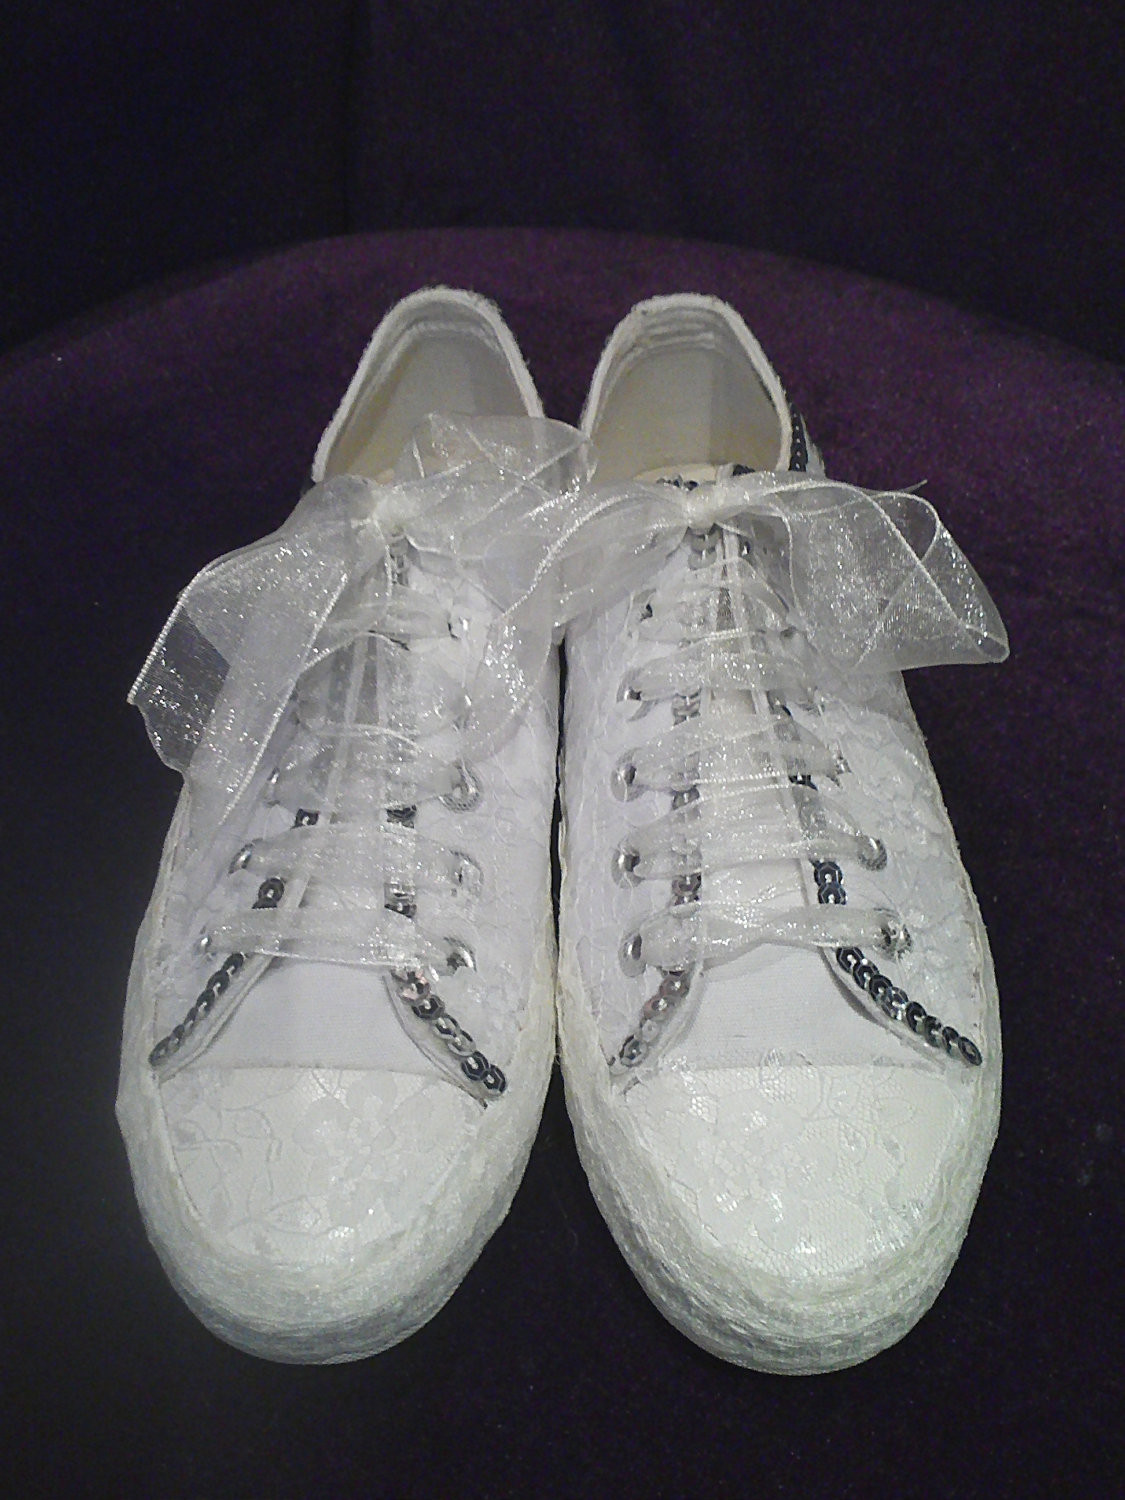 Wedding Converse Shoes
 Converse sneaker handmade Lace bridal shoes by